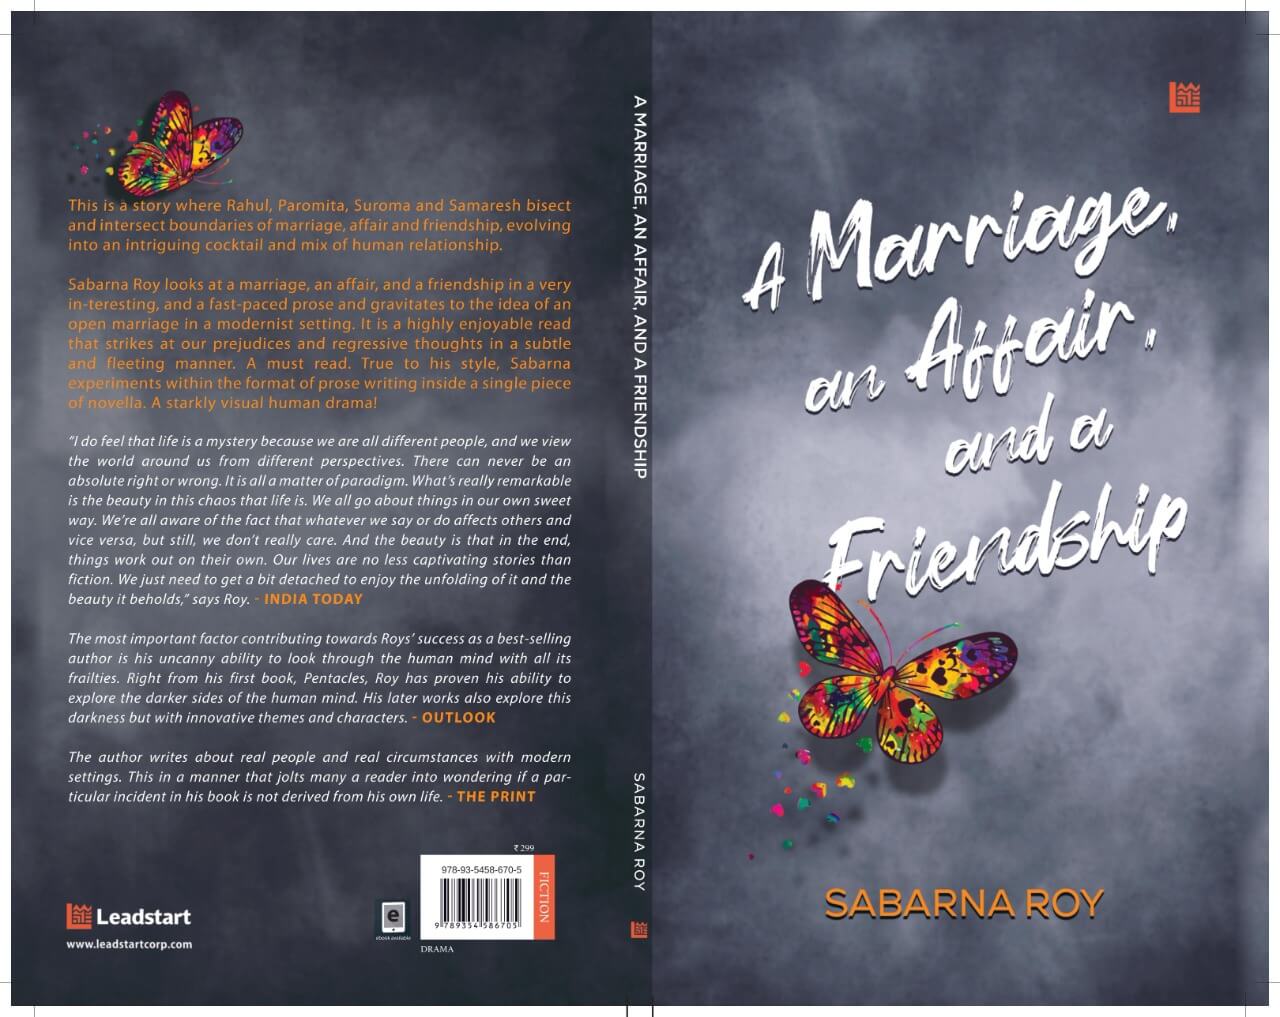 Interview with Sabarna Roy on his latest book: A Marriage, an Affair, and a Friendship